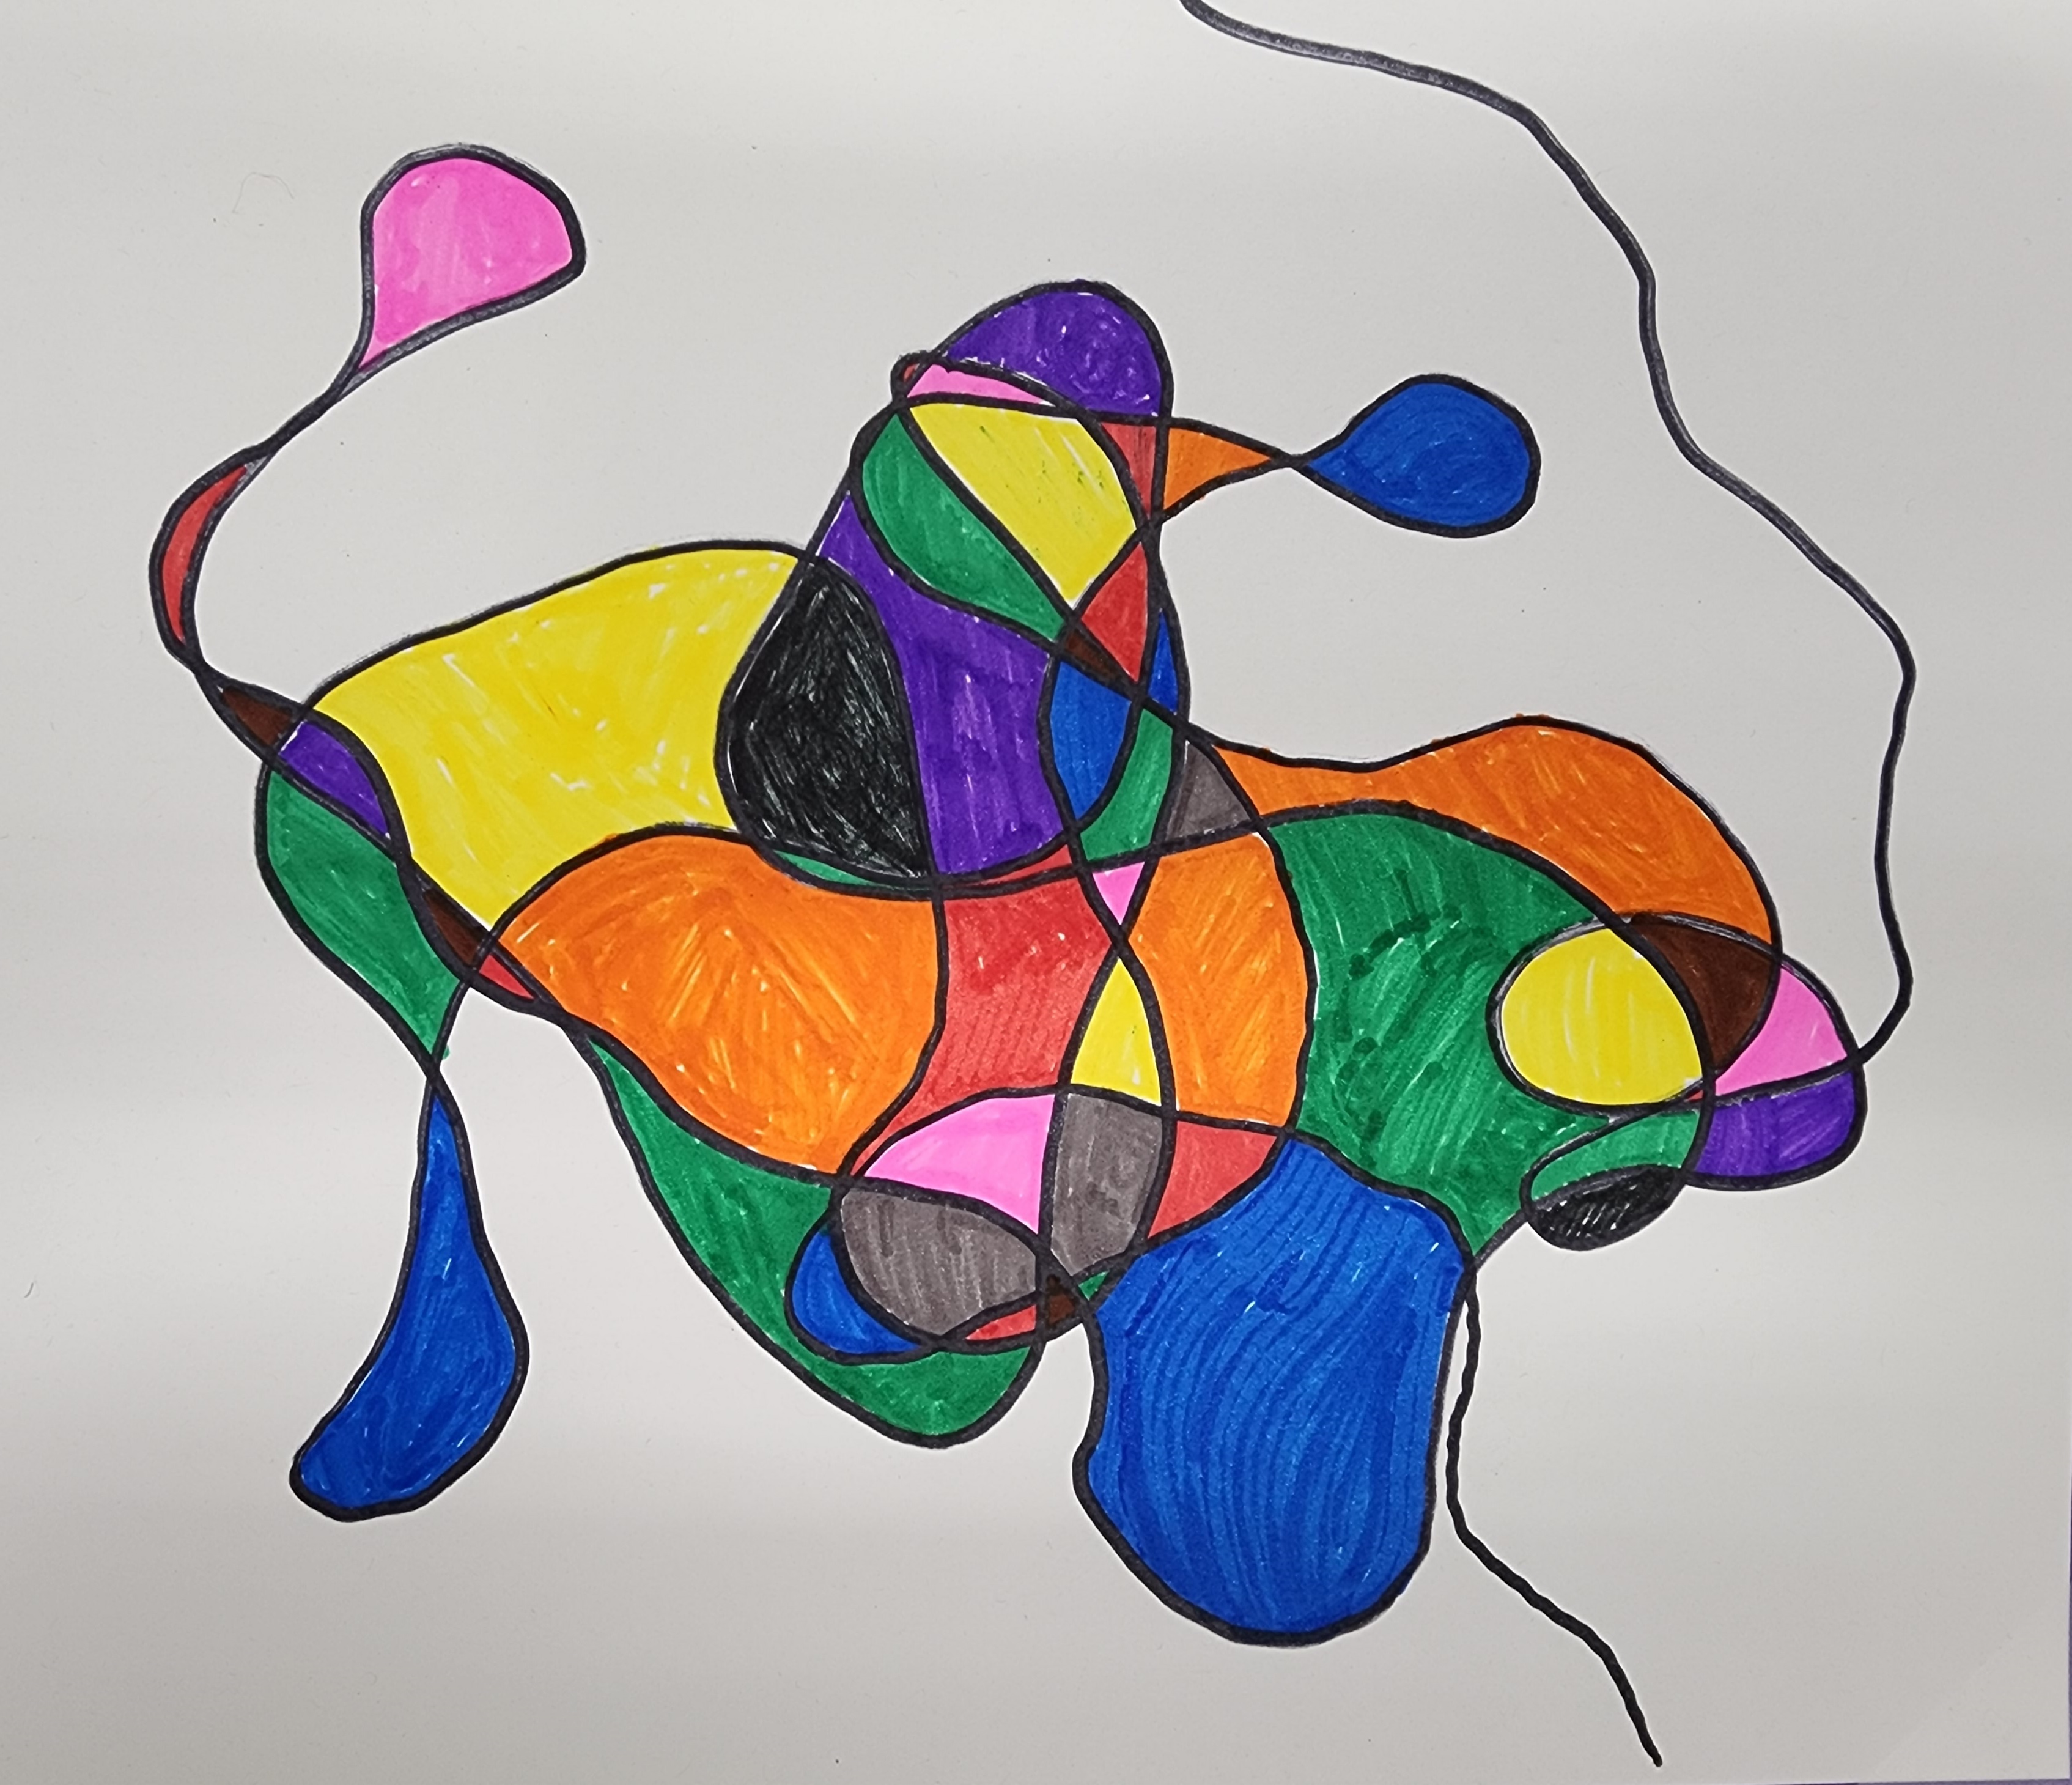 Neurographic Drawing - black line abstract with regions colored-in in crayola markers